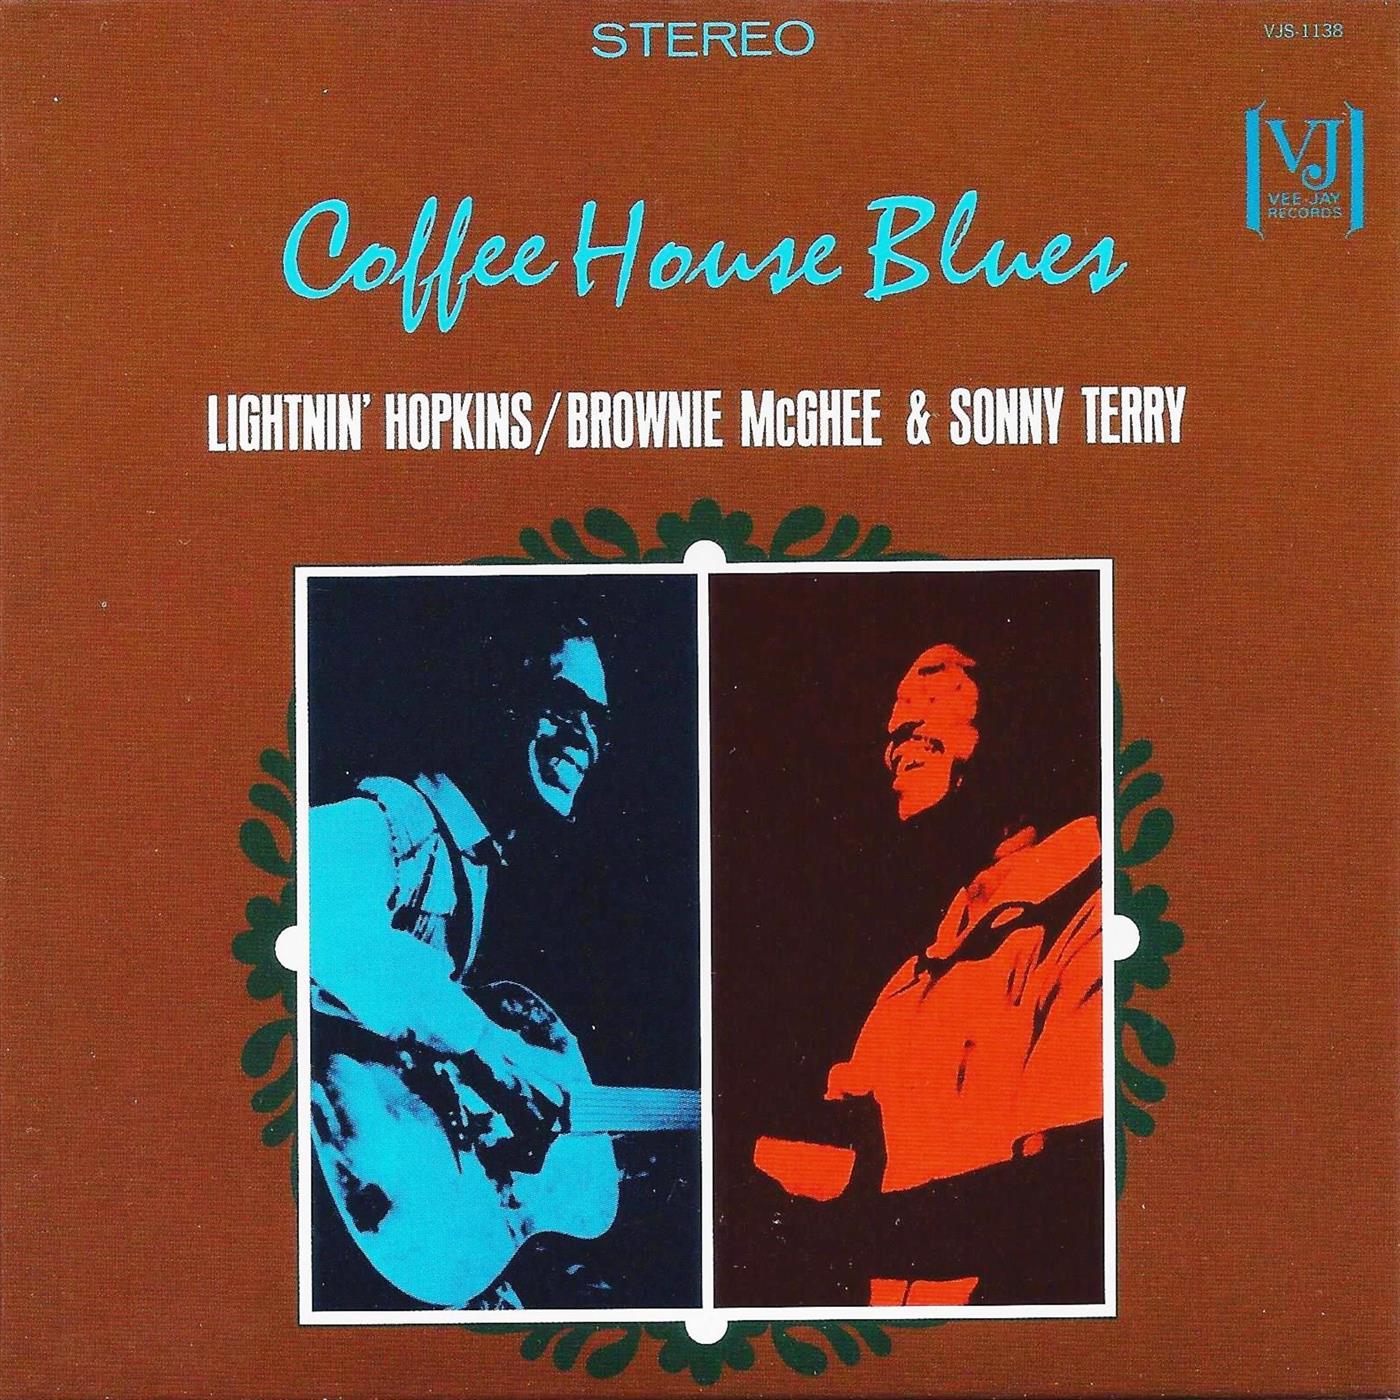 Blues For The Lowlands / Brownie McGhee & Sonny Terry